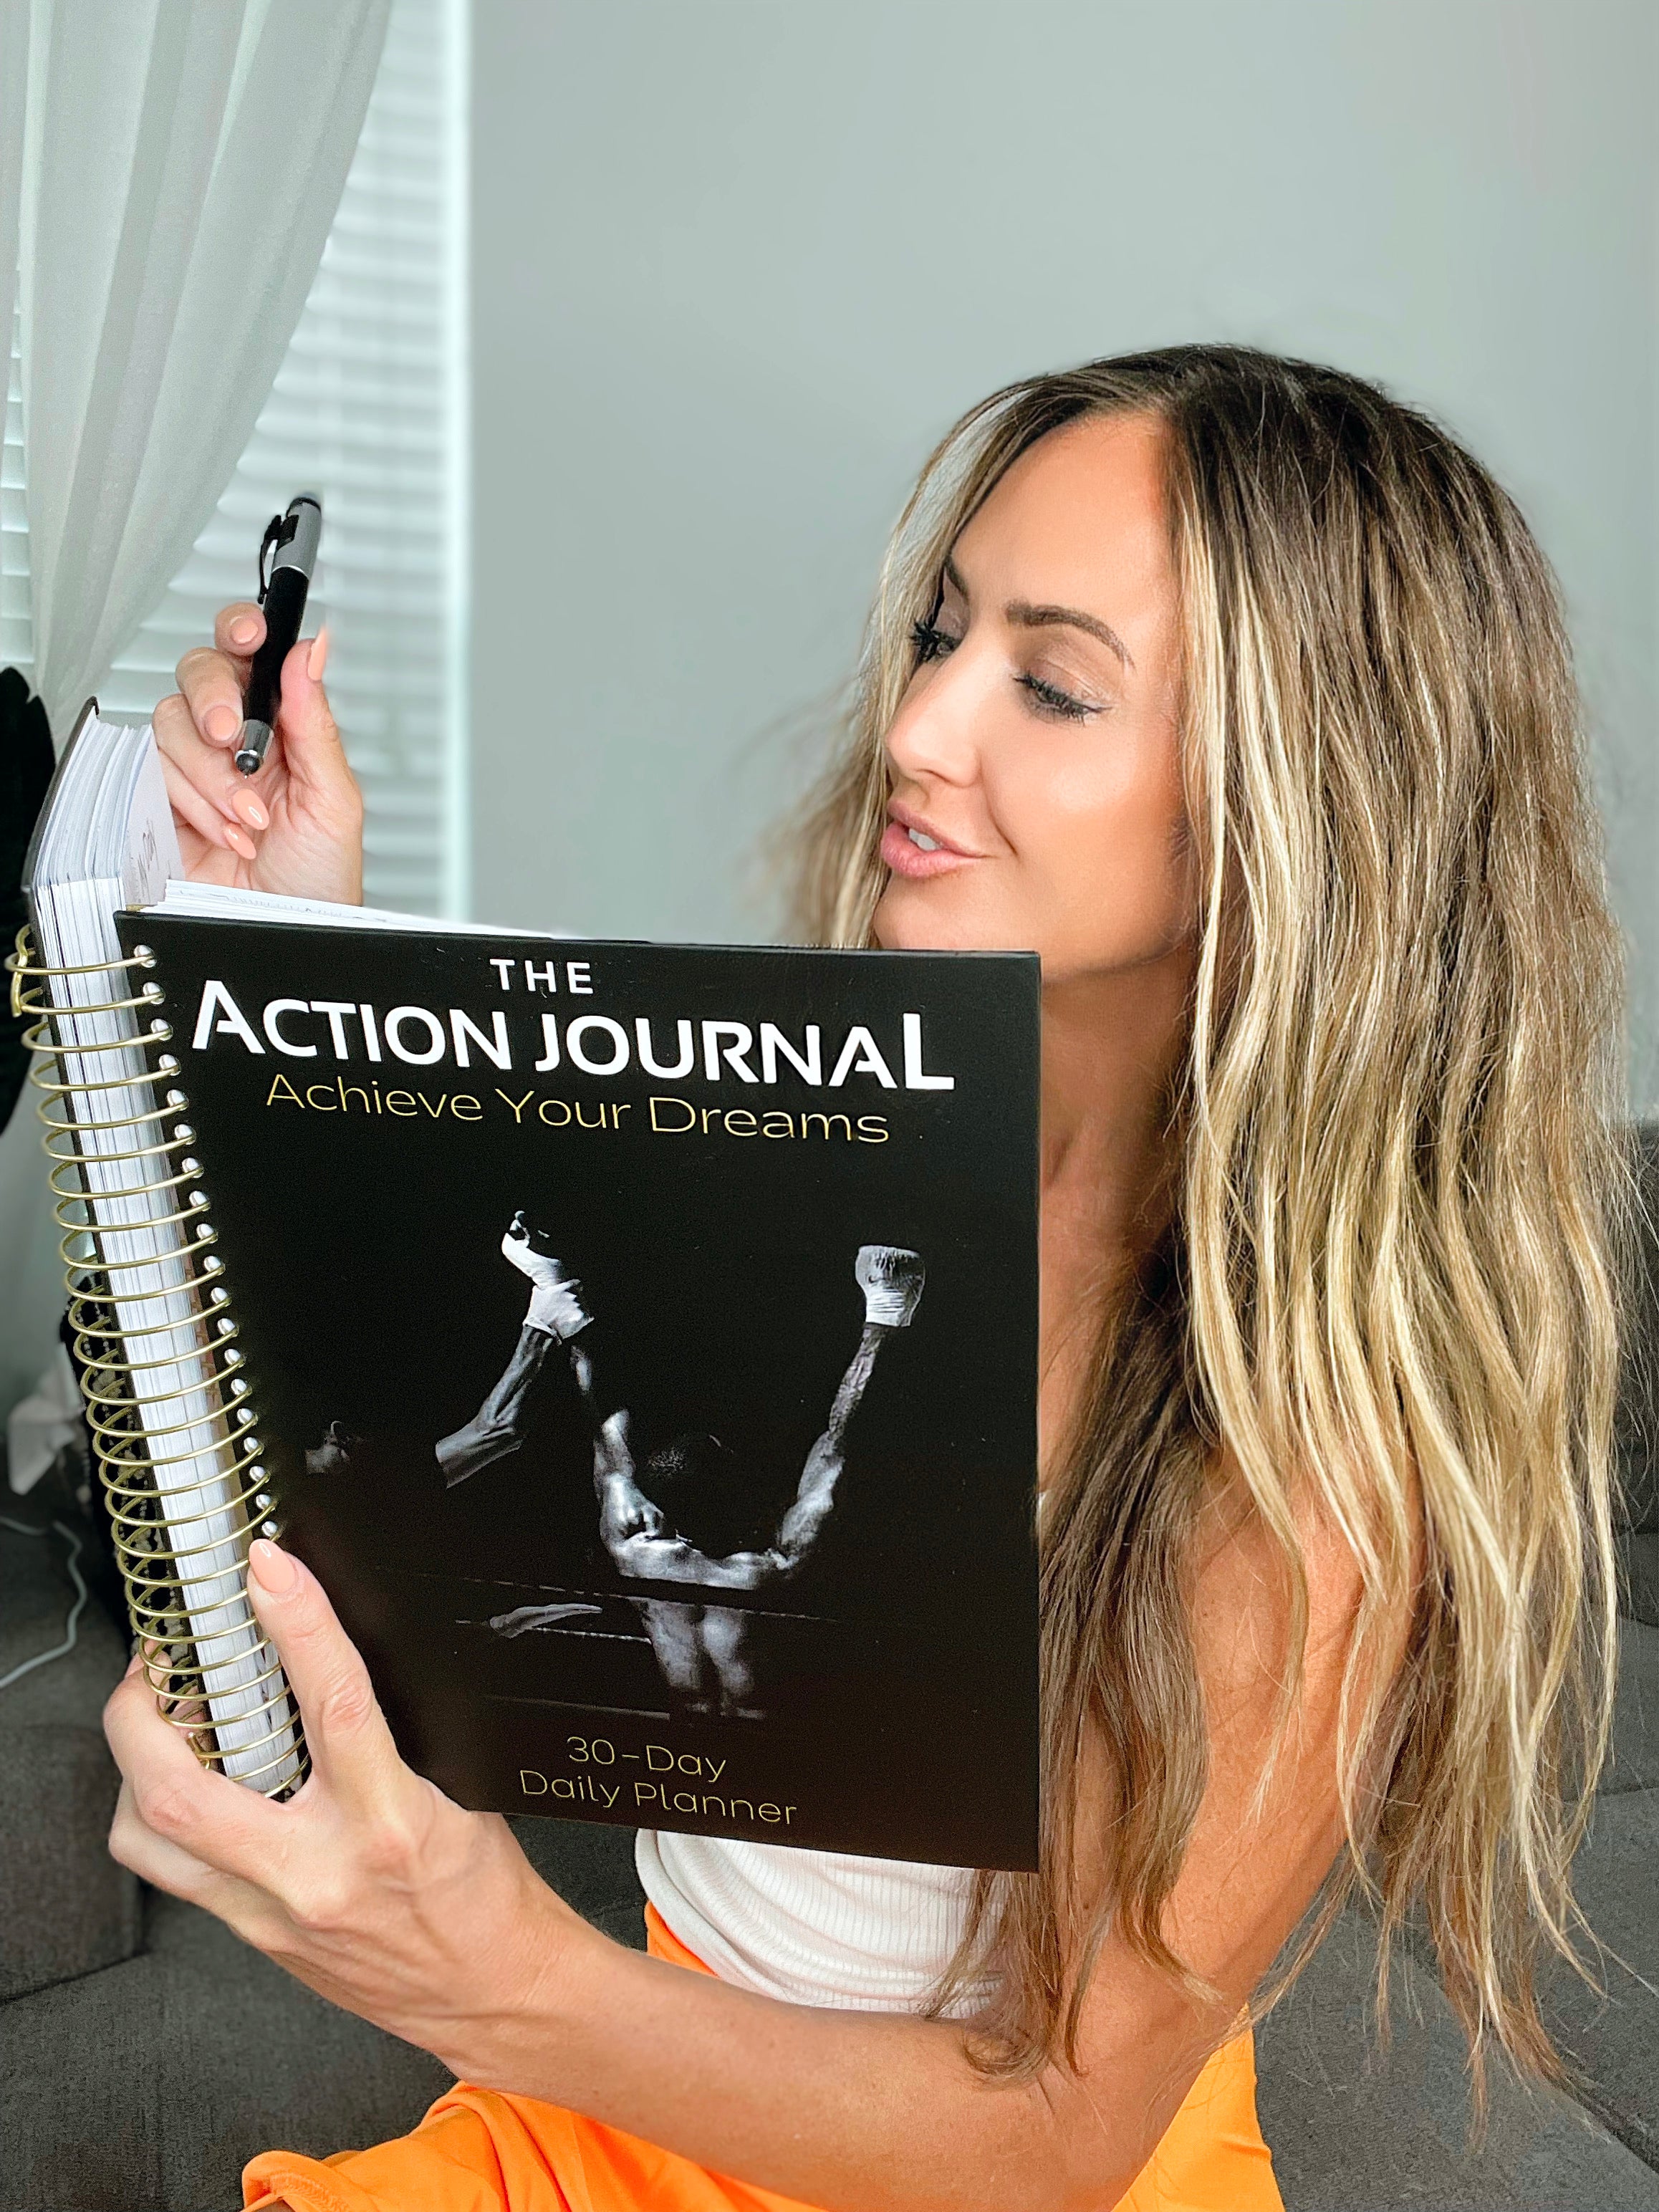 The Action Journal - Achieve Your Dreams Daily Planner